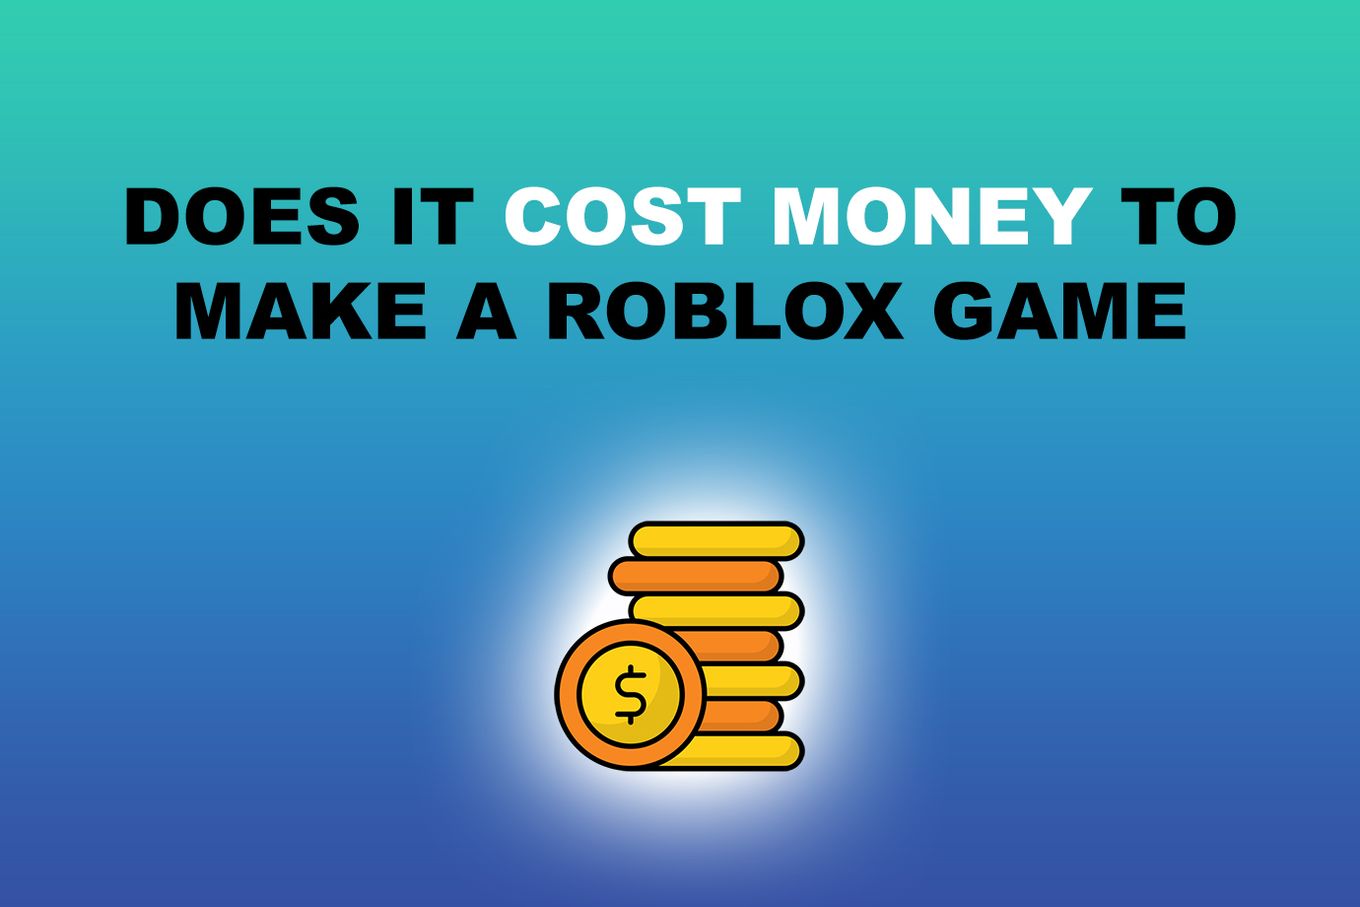 Does it cost money to make a Roblox game